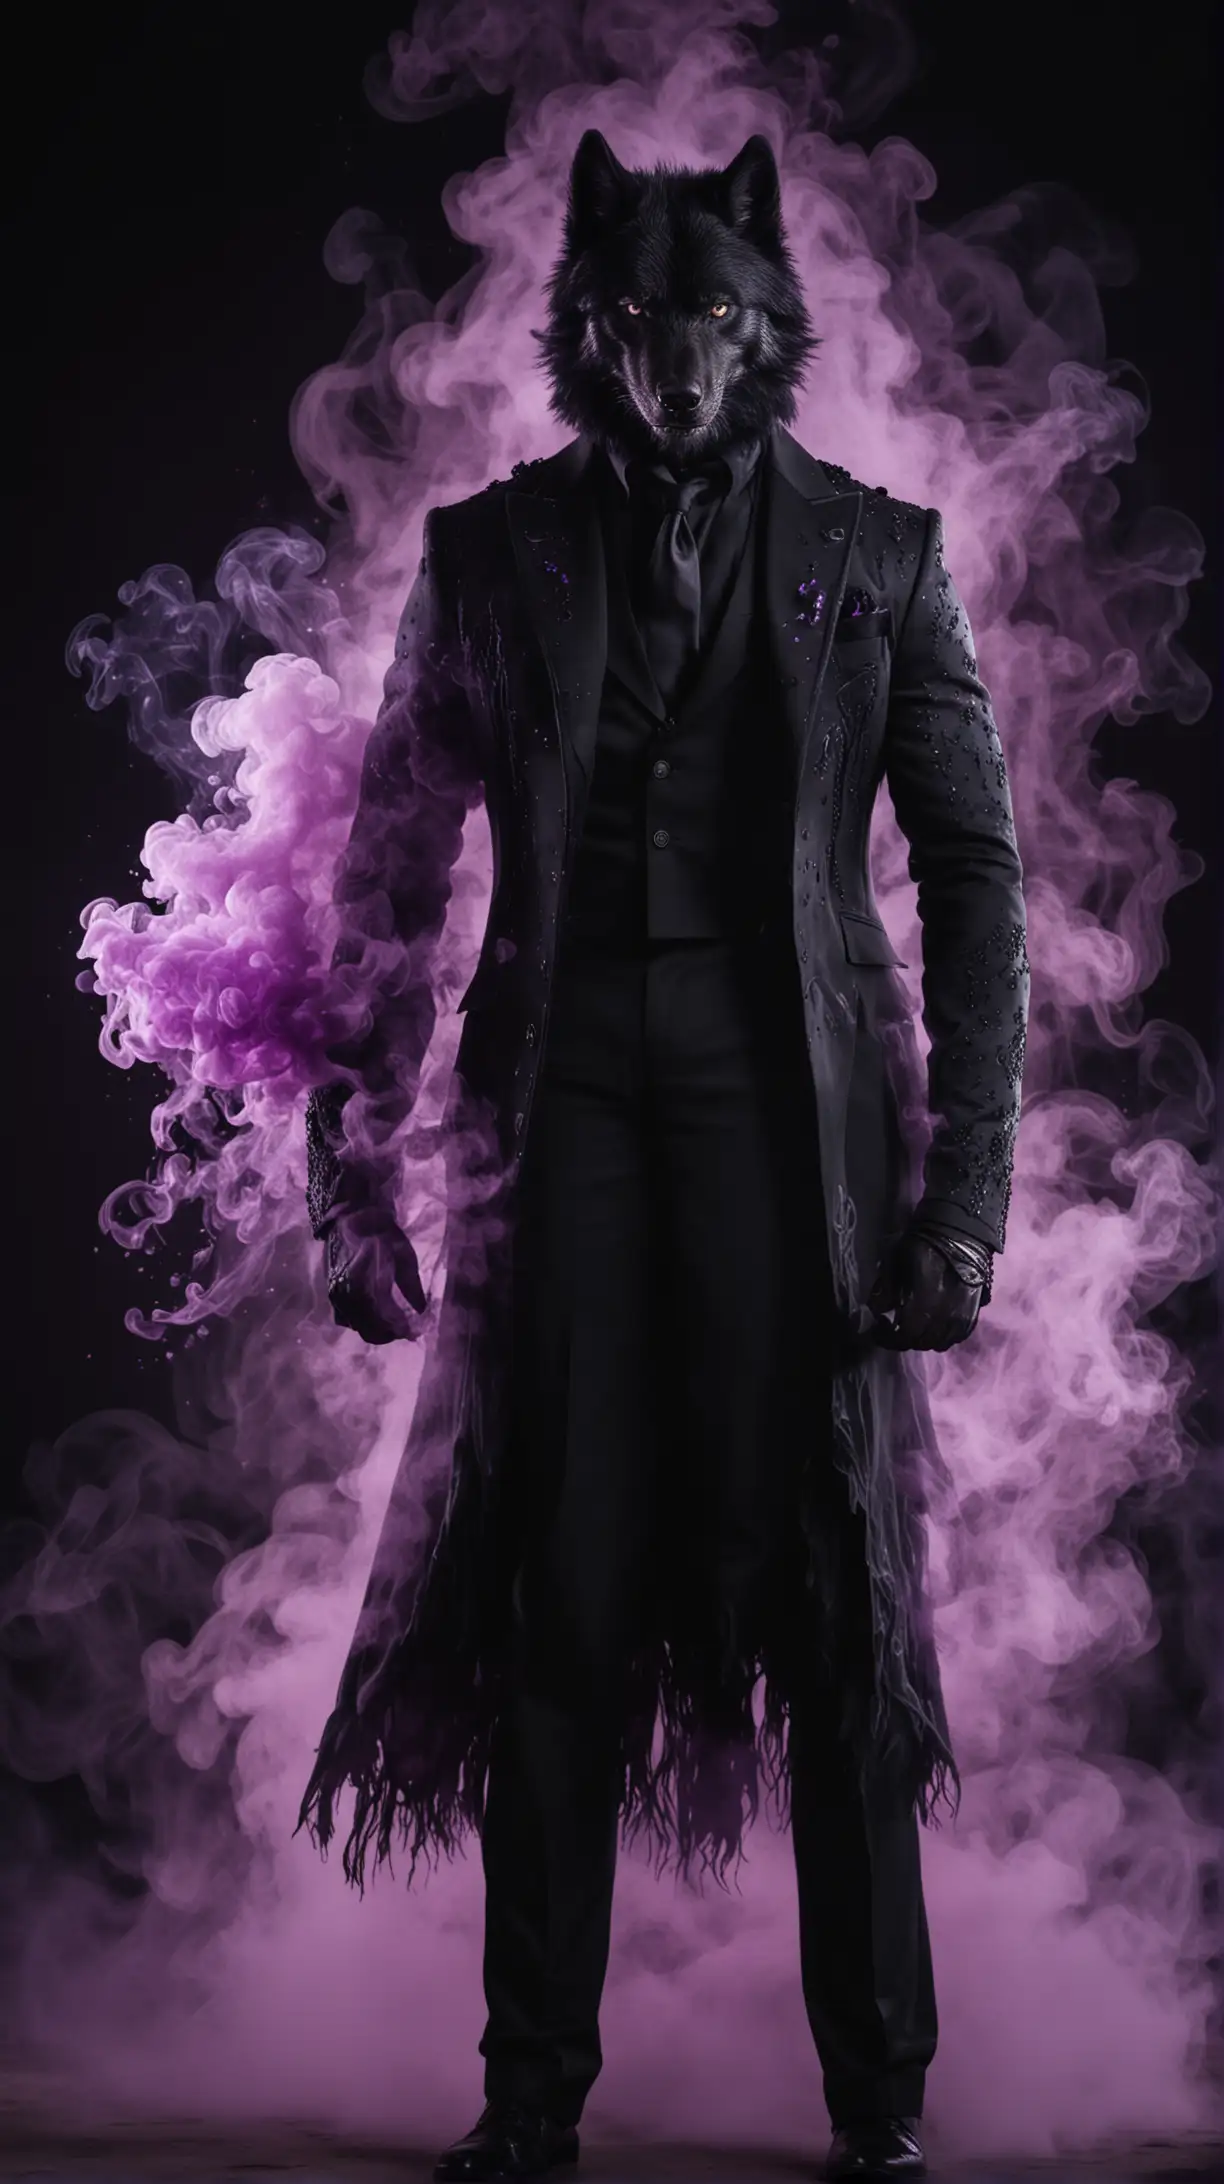 A handsome young muscular man in black royal suit, engulfed with a purple luminous smoke in the dark, with a black wolf standing beside him